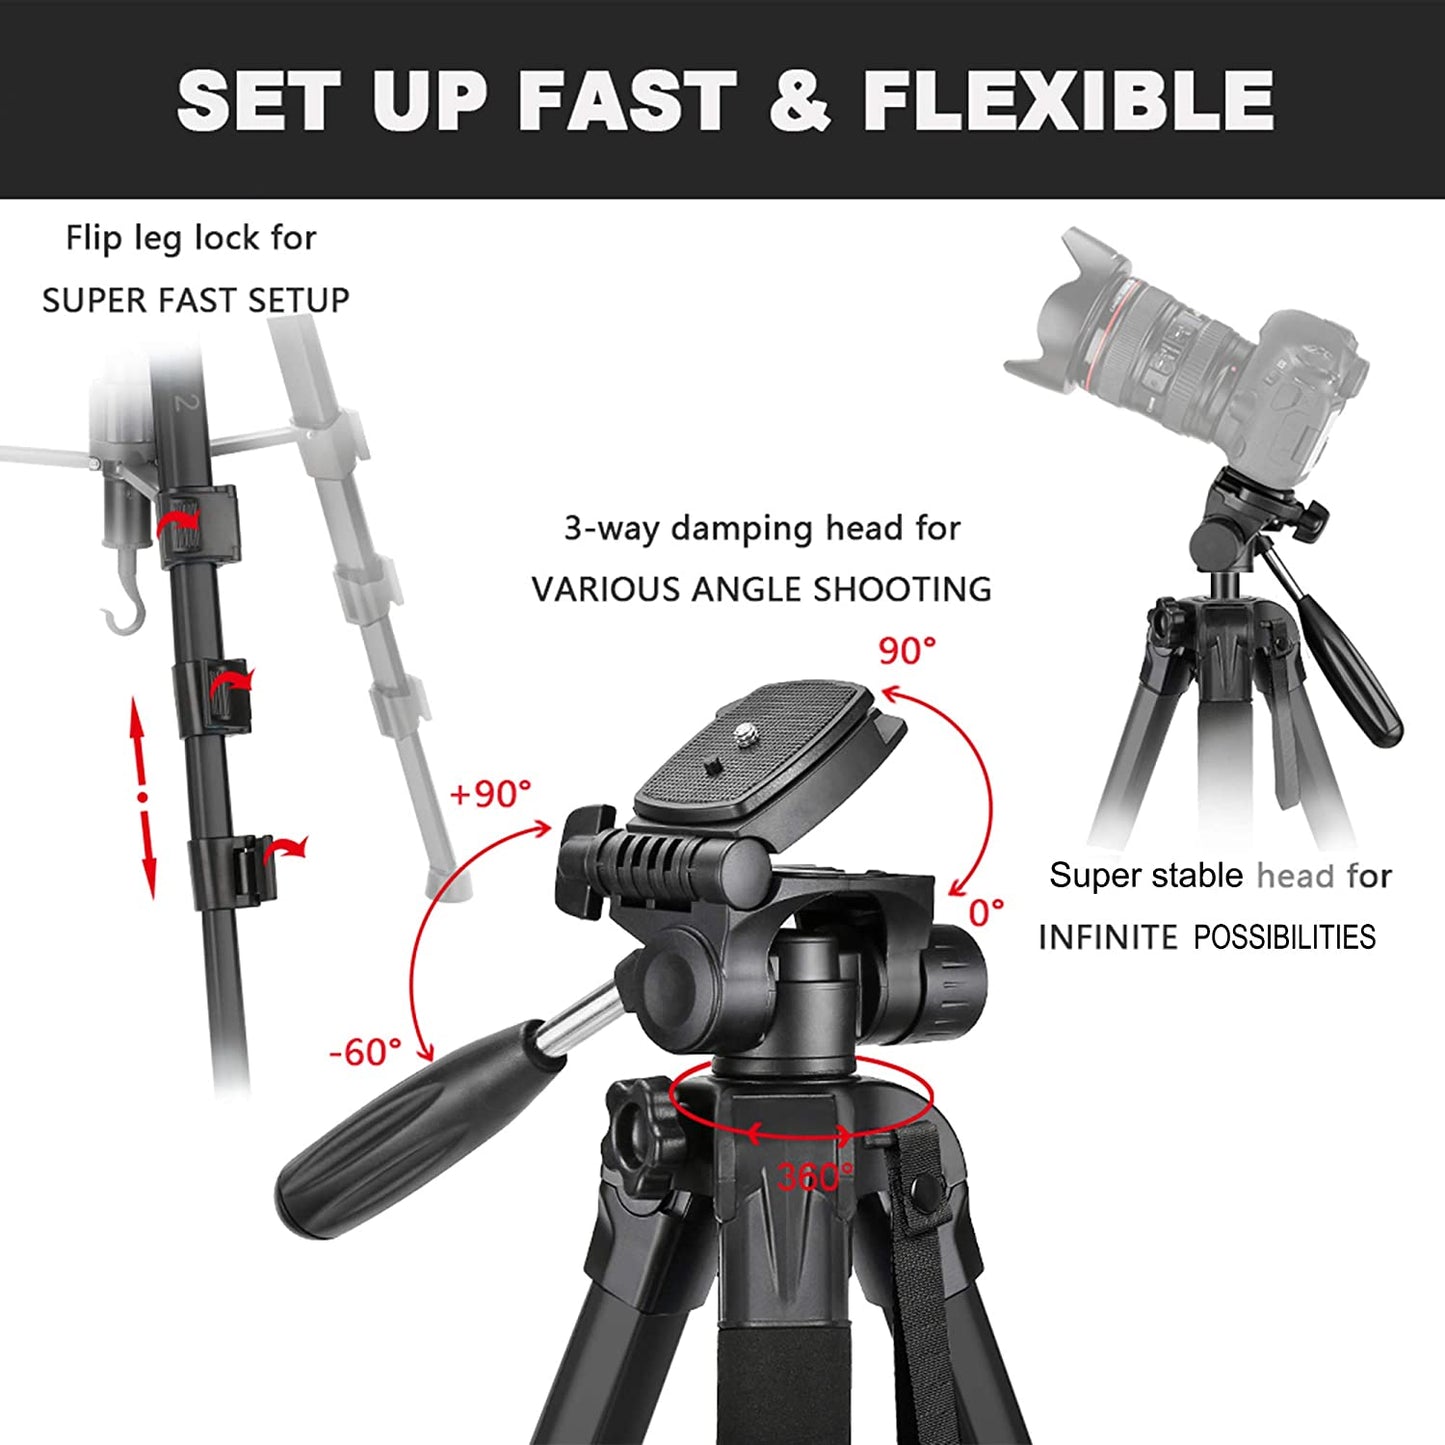 Victiv 72-inch Camera Tripod Aluminum Monopod T72 Max. Height 182 cm - Lightweight and Compact for Travel with 3-way Swivel Head and 2 Quick Release Plates for DSLR Video Shooting - Black